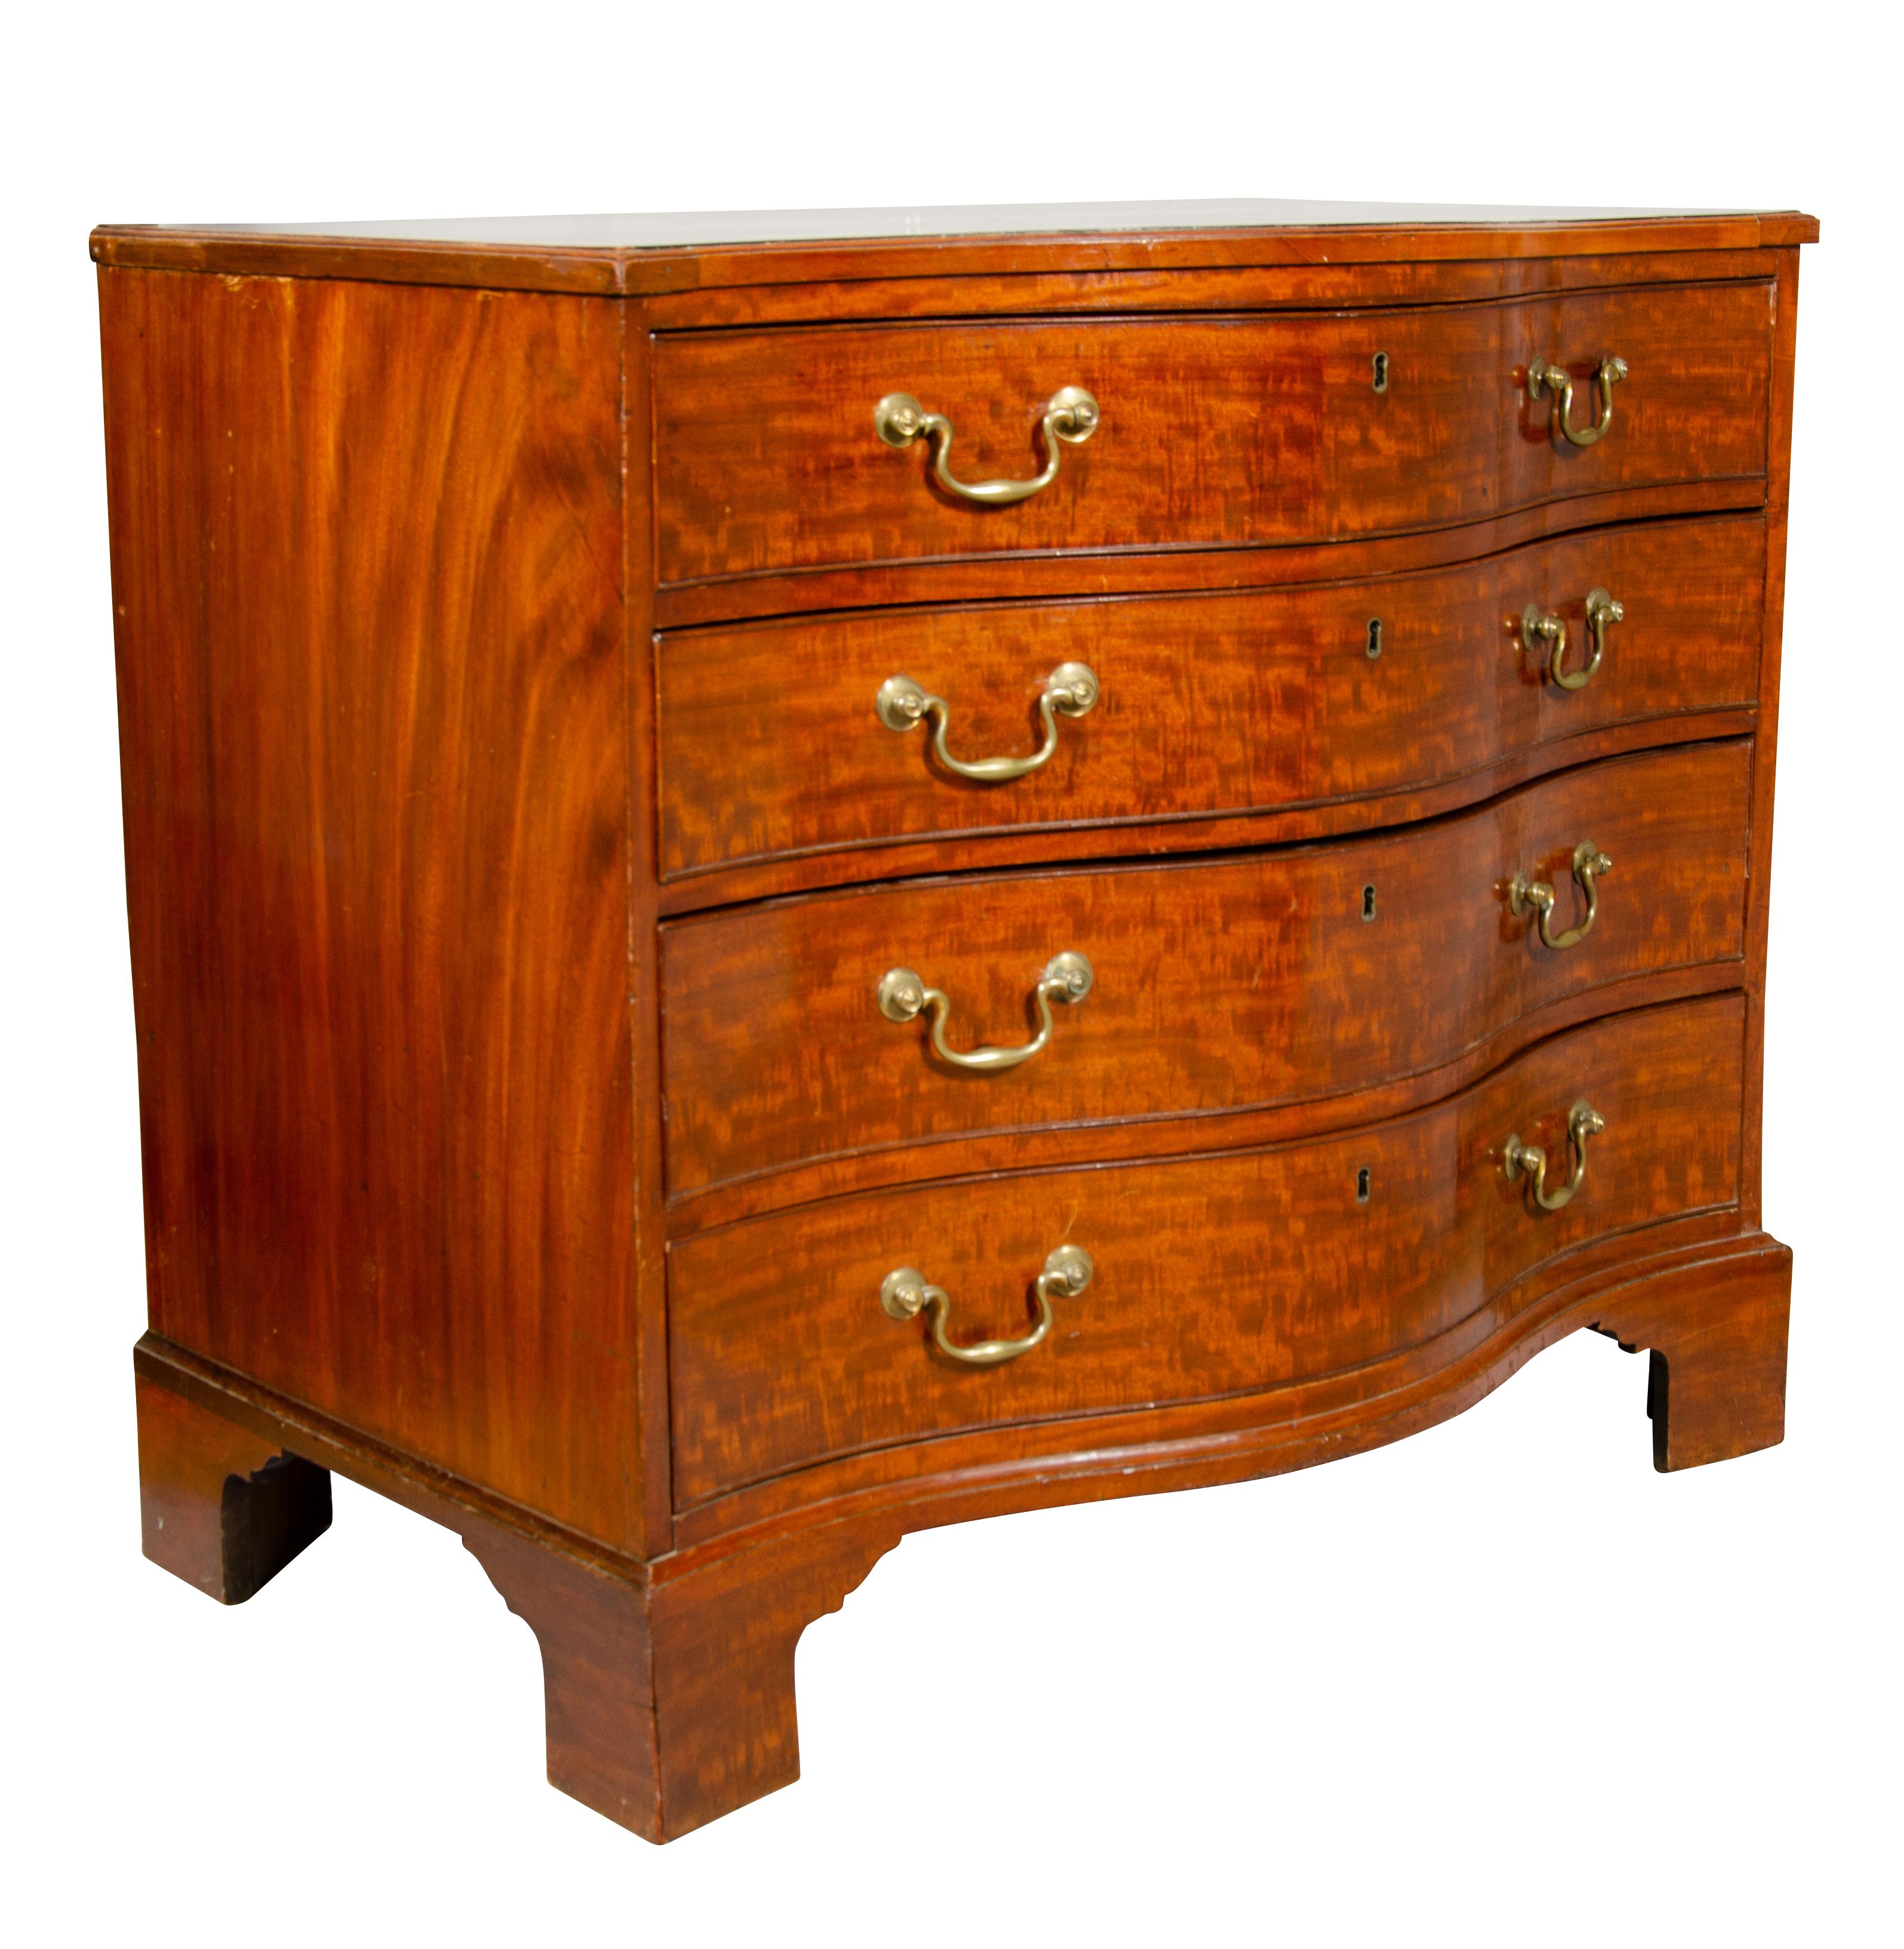 Constructed of the finest mahogany, serpentine top over a conforming case containing a brushing slide and four drawers. The top with fitted compartments. Original bail handles, bracket feet.